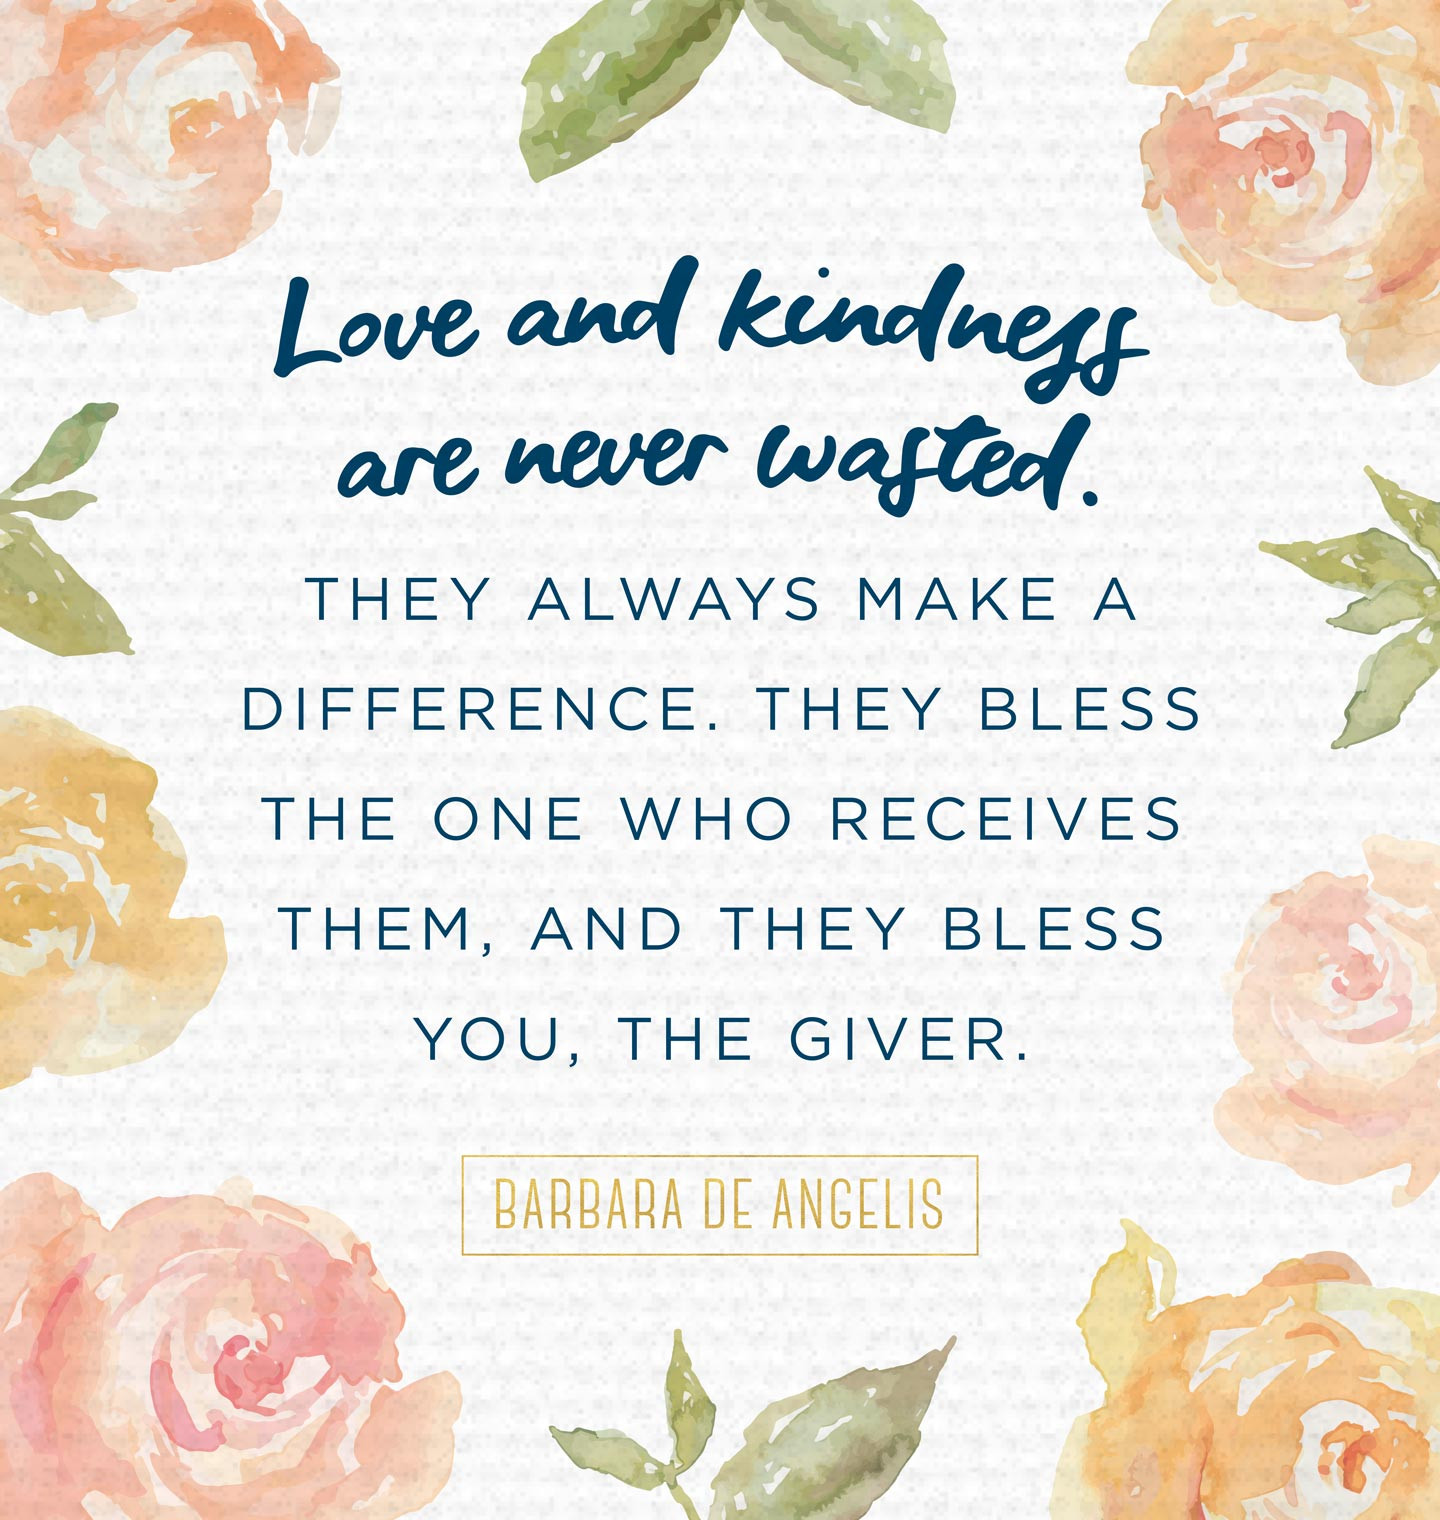 Thank You For Your Kindness And Generosity Quotes
 30 Inspiring Kindness Quotes That Will Enlighten You FTD